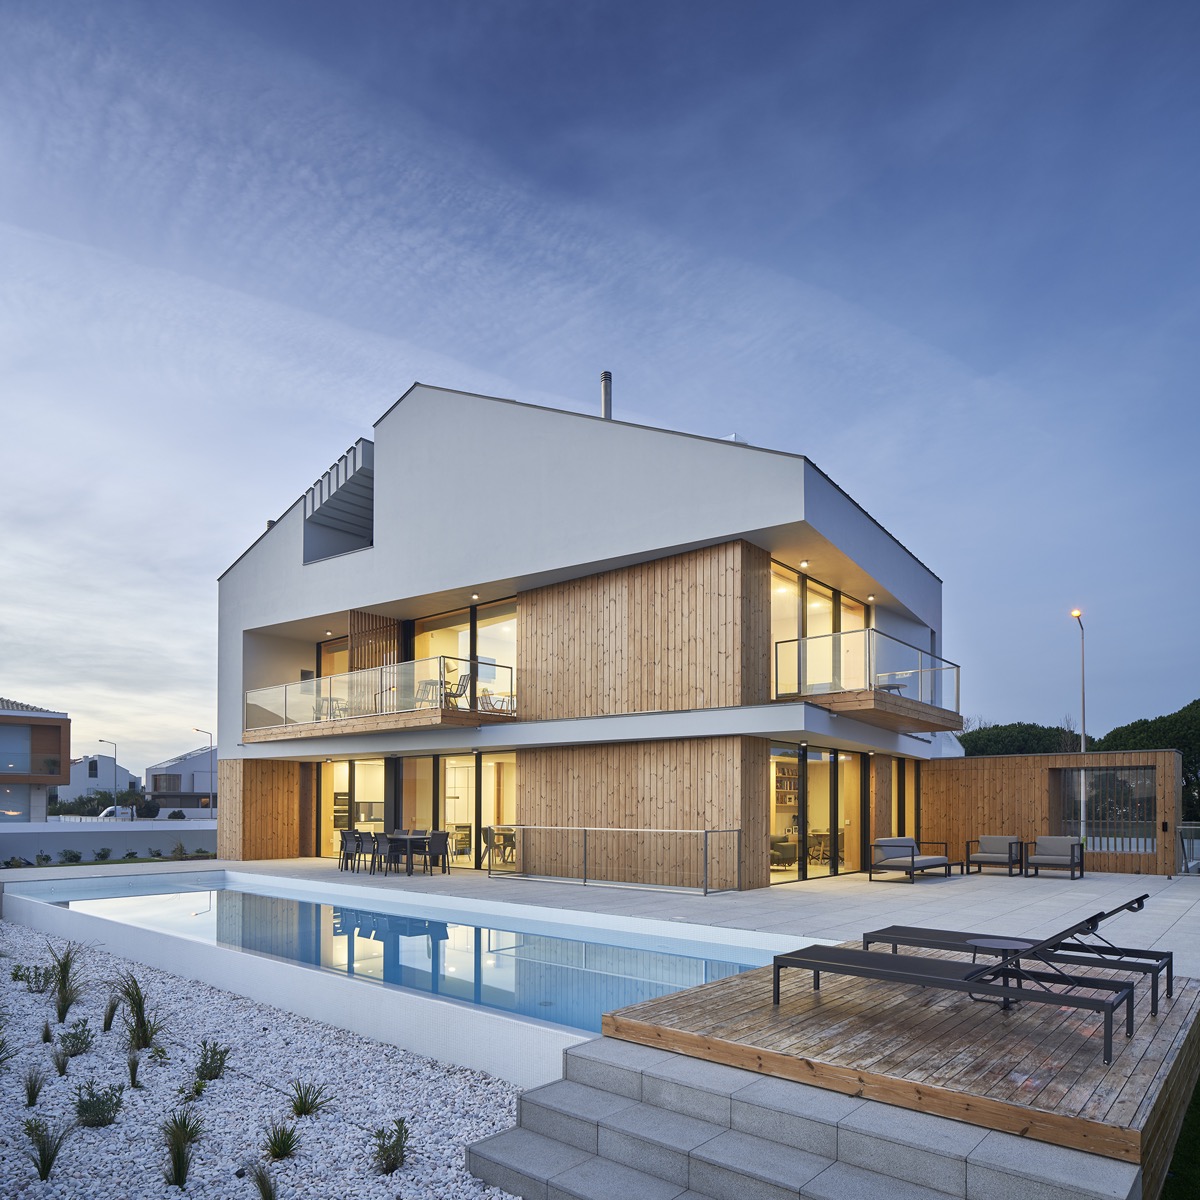 A Modern Pitched Roof House On Portugal’s West Coast [Video] thumbnail